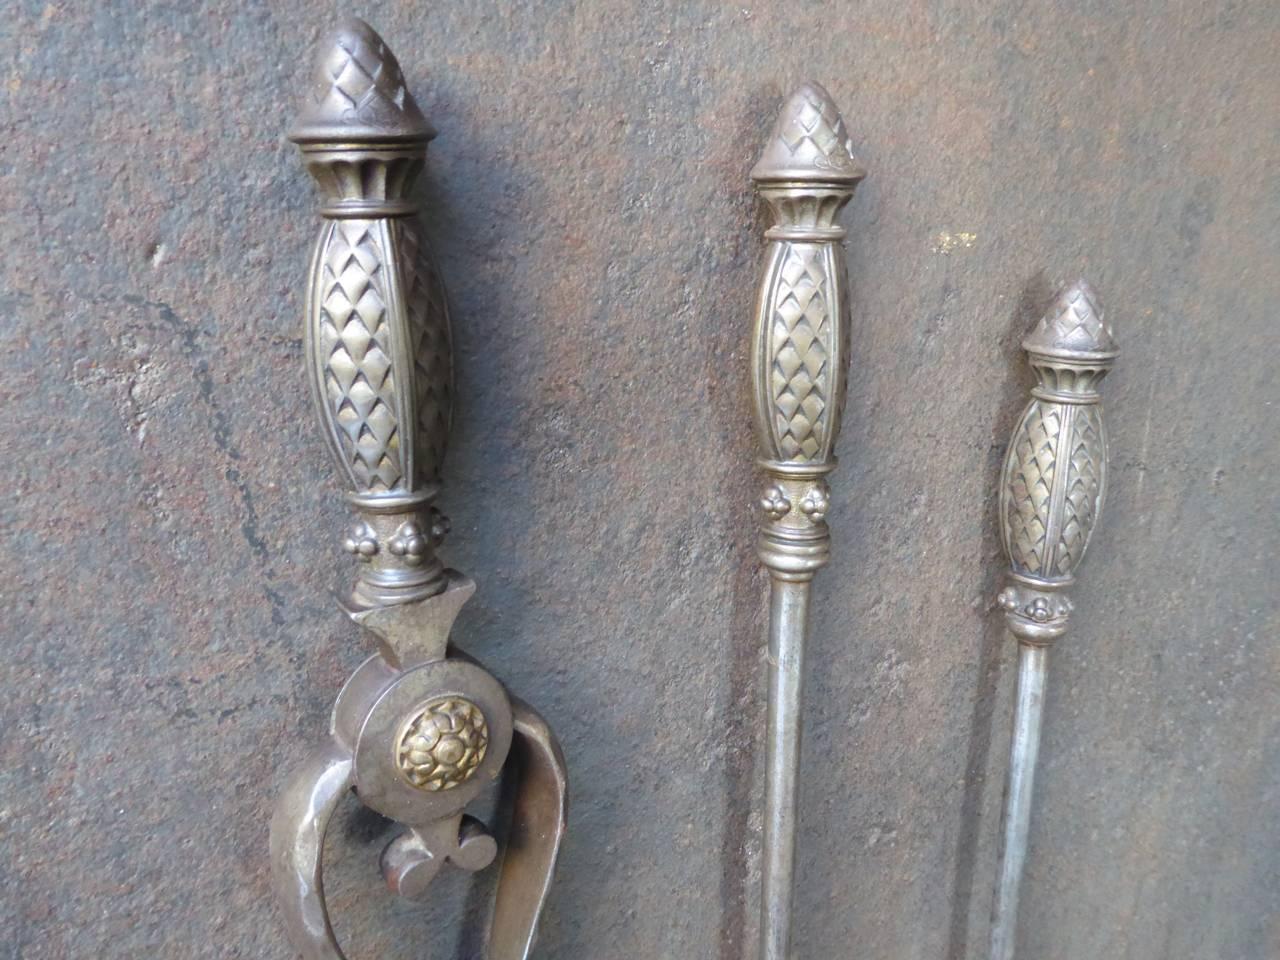 English Art Nouveau fireplace tools made of wrought iron and brass.

We have a unique and specialized collection of antique and used fireplace accessories consisting of more than 1000 listings at 1stdibs. Amongst others, we always have 500+